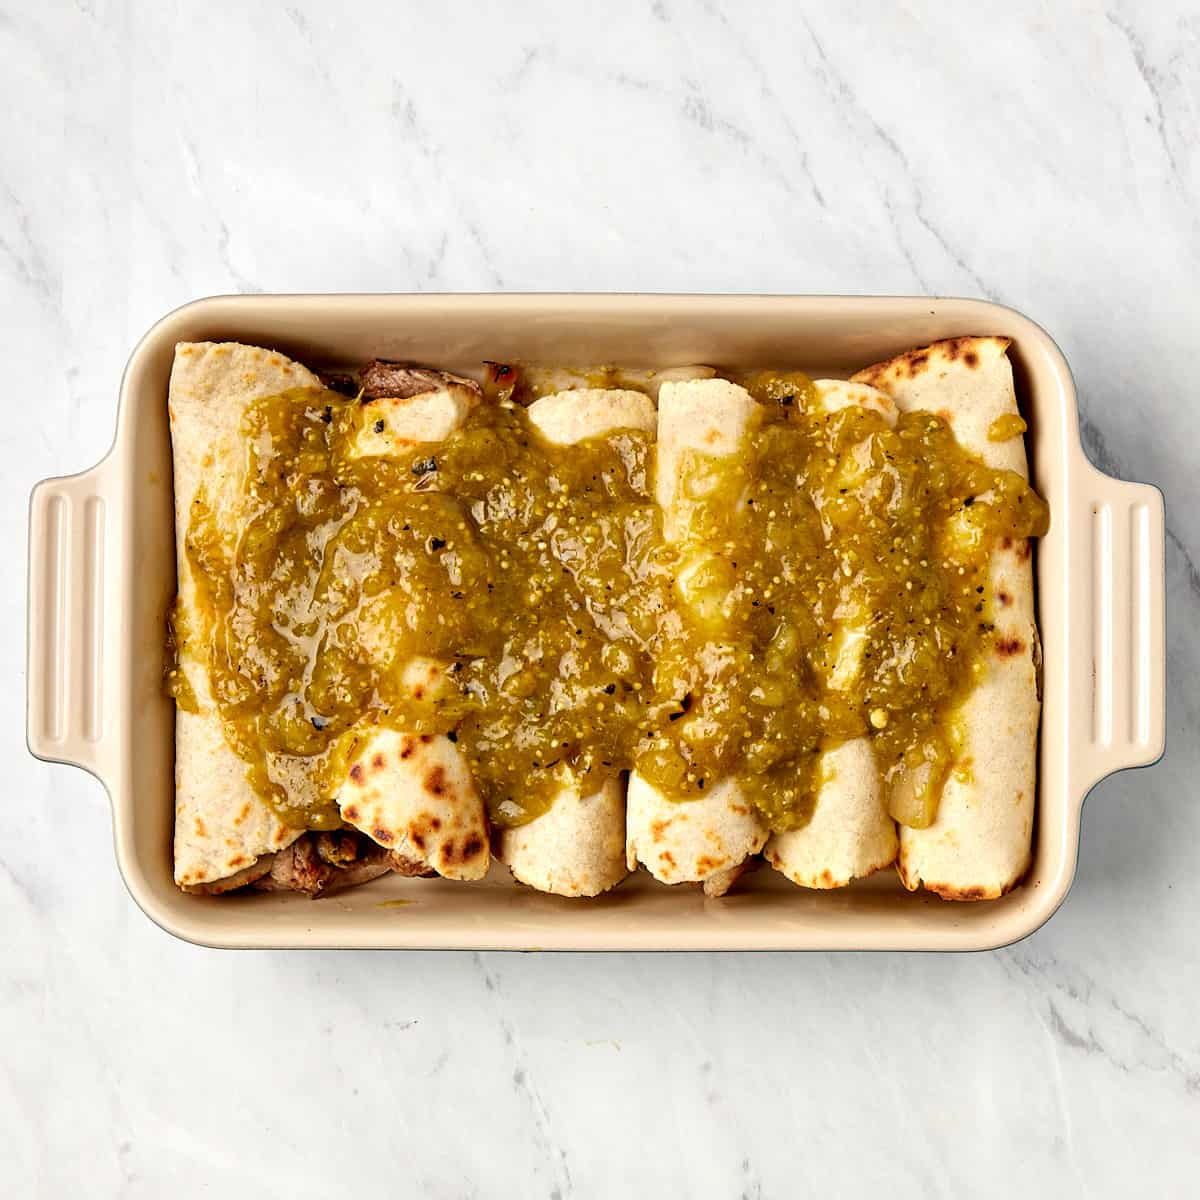 uncooked enchiladas in a casserole dish topped with tomatillo sauce